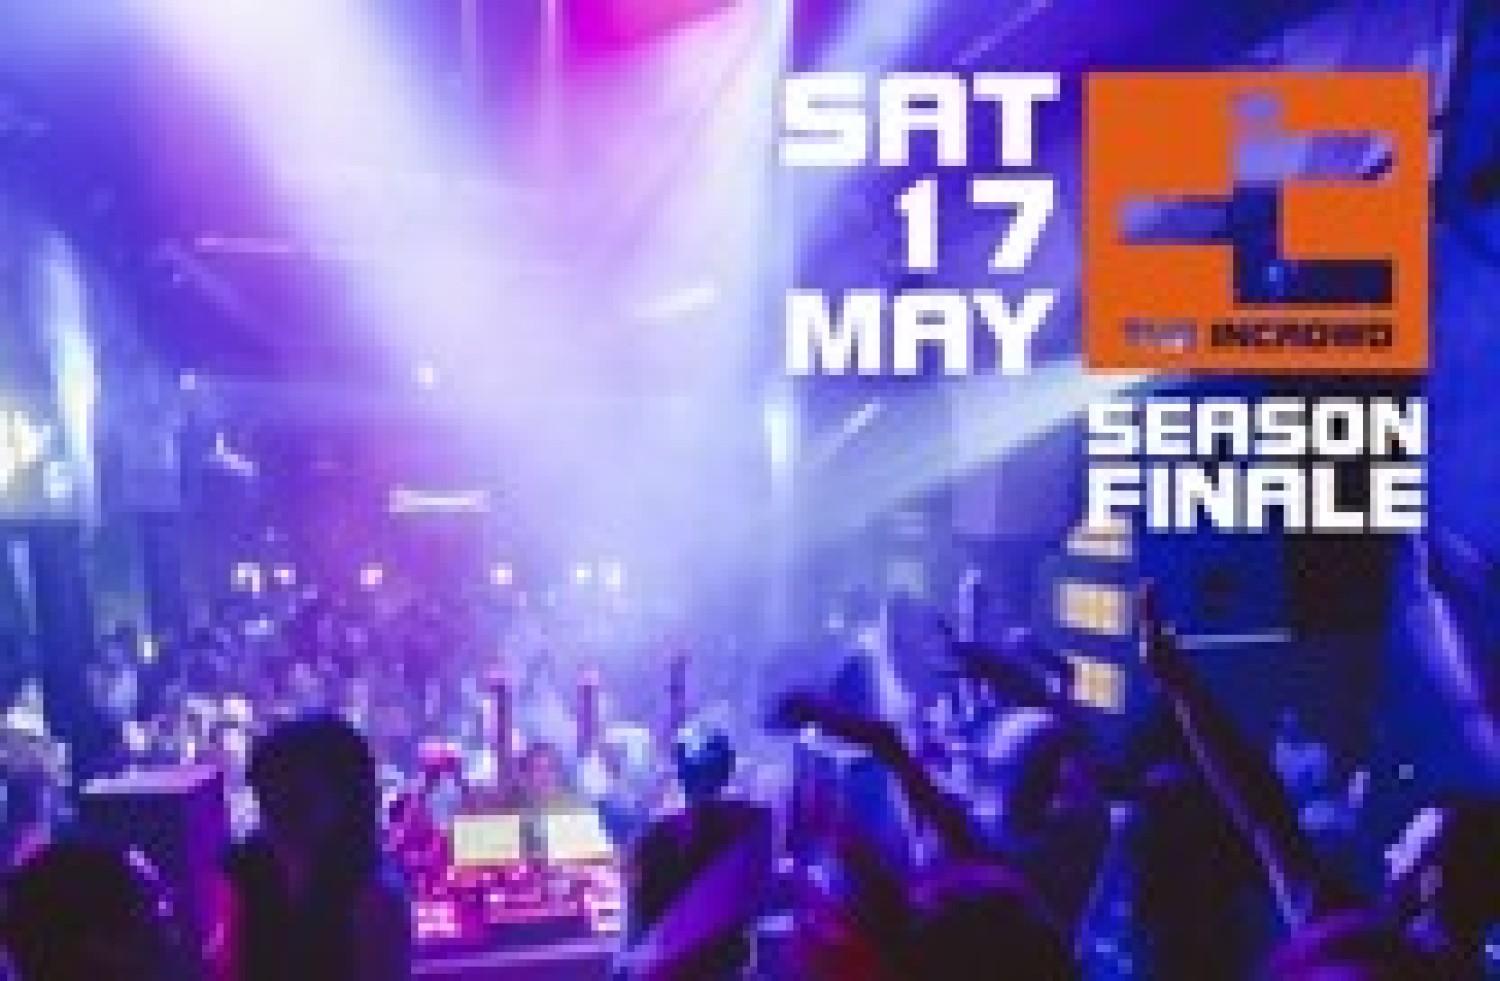 Party nieuws: The Incrowd Season Finale in Hotel Arena Amsterdam